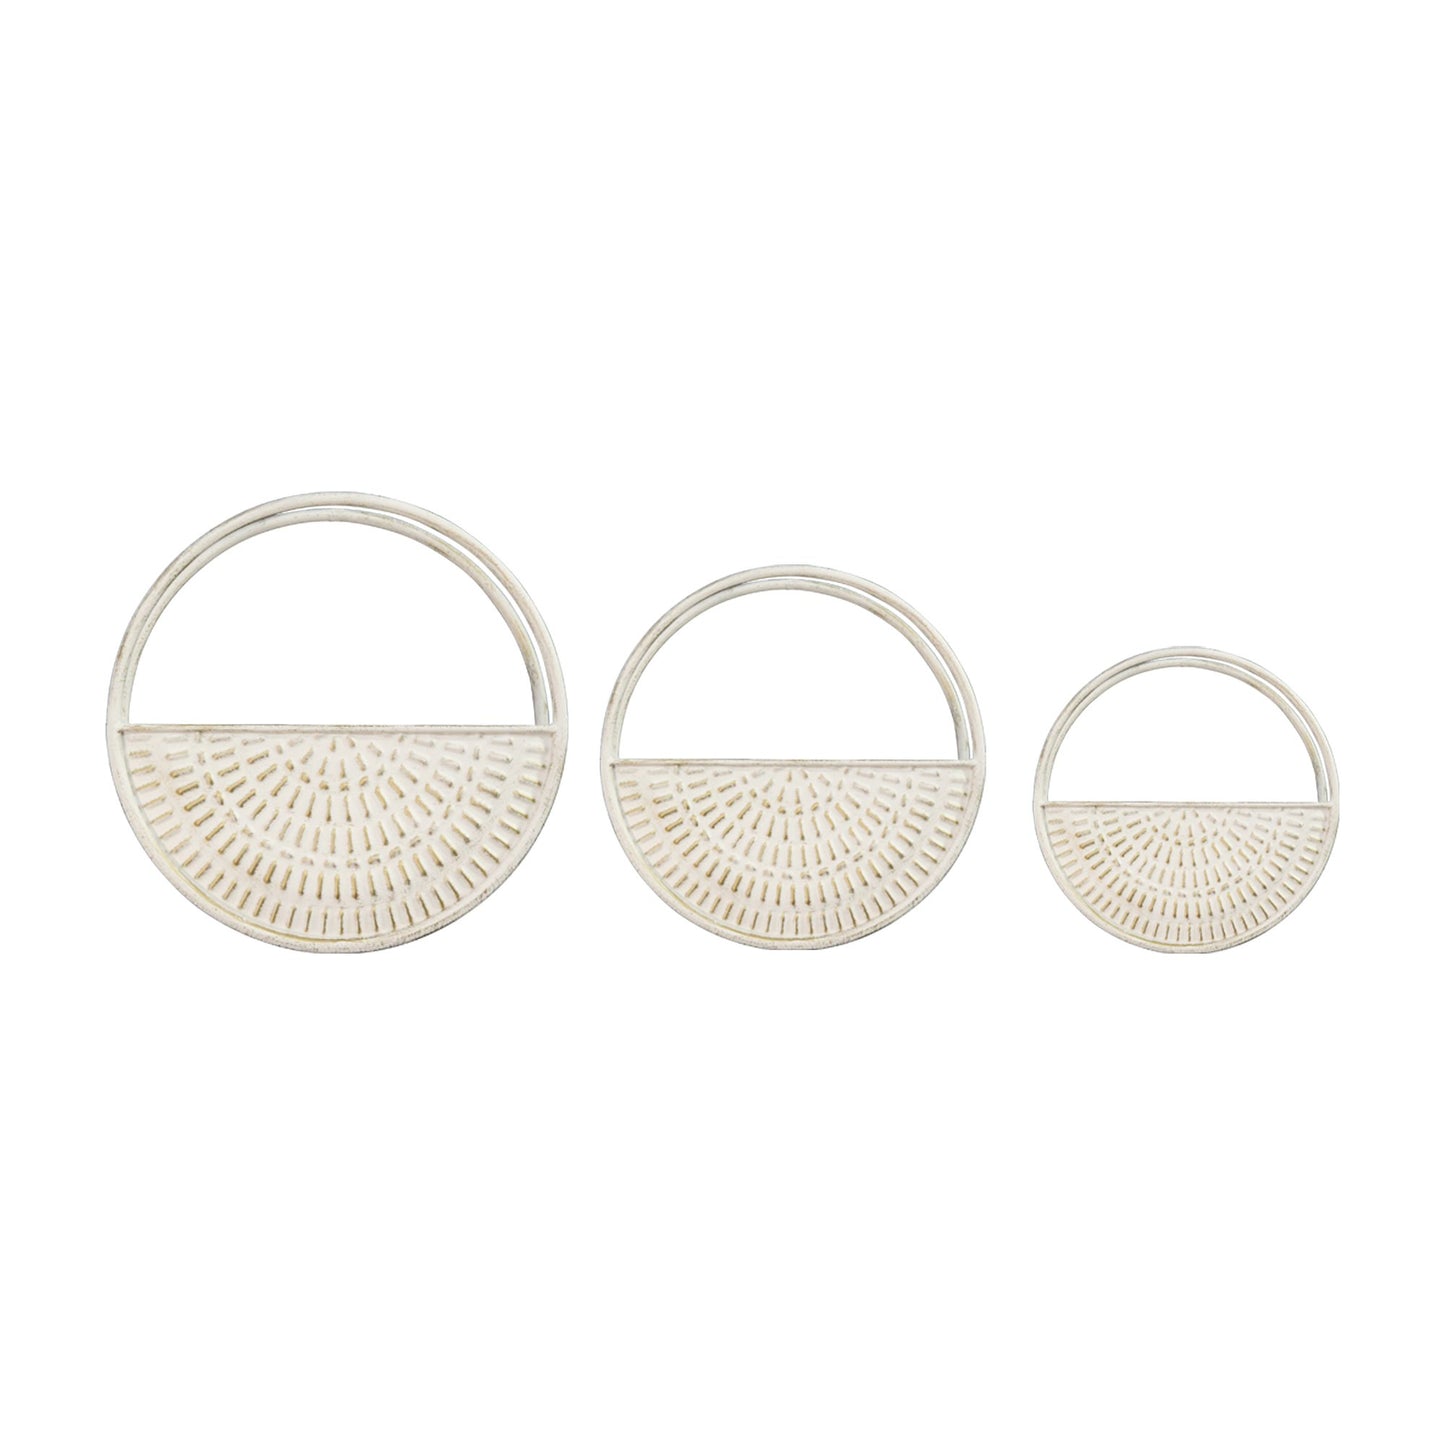 S-3 White Distressed Circle Wall Planters